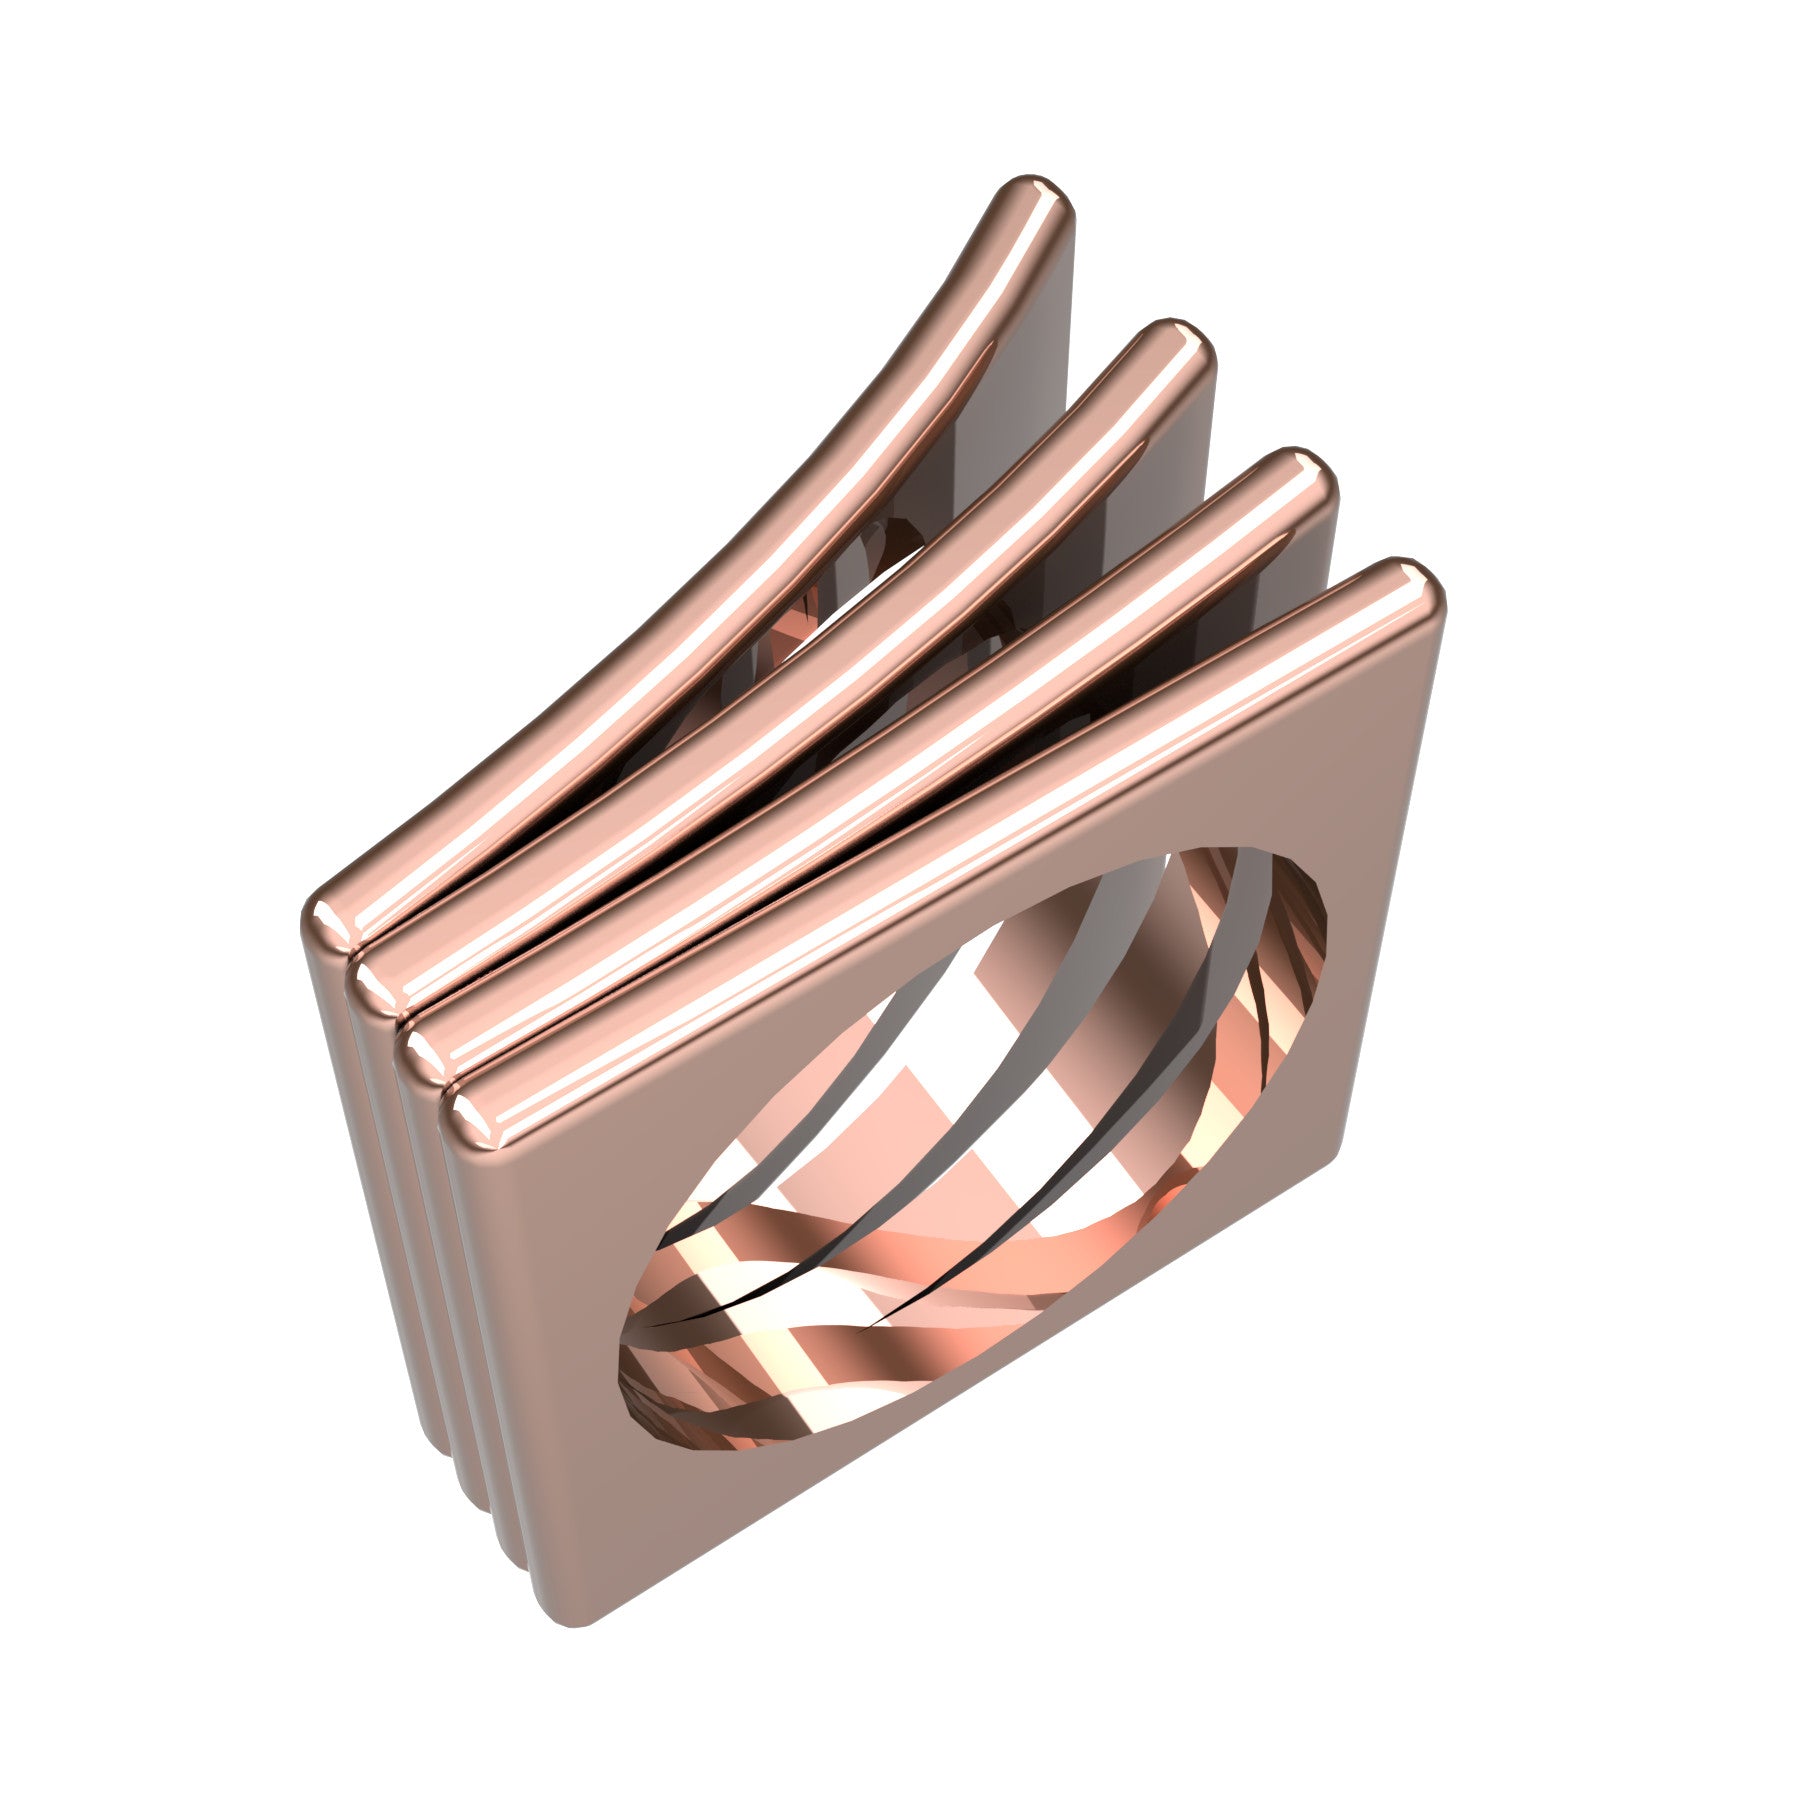 band ring, 18 K pink gold, weight about 20,8 g. (0,73 oz), width 8,7 mm max